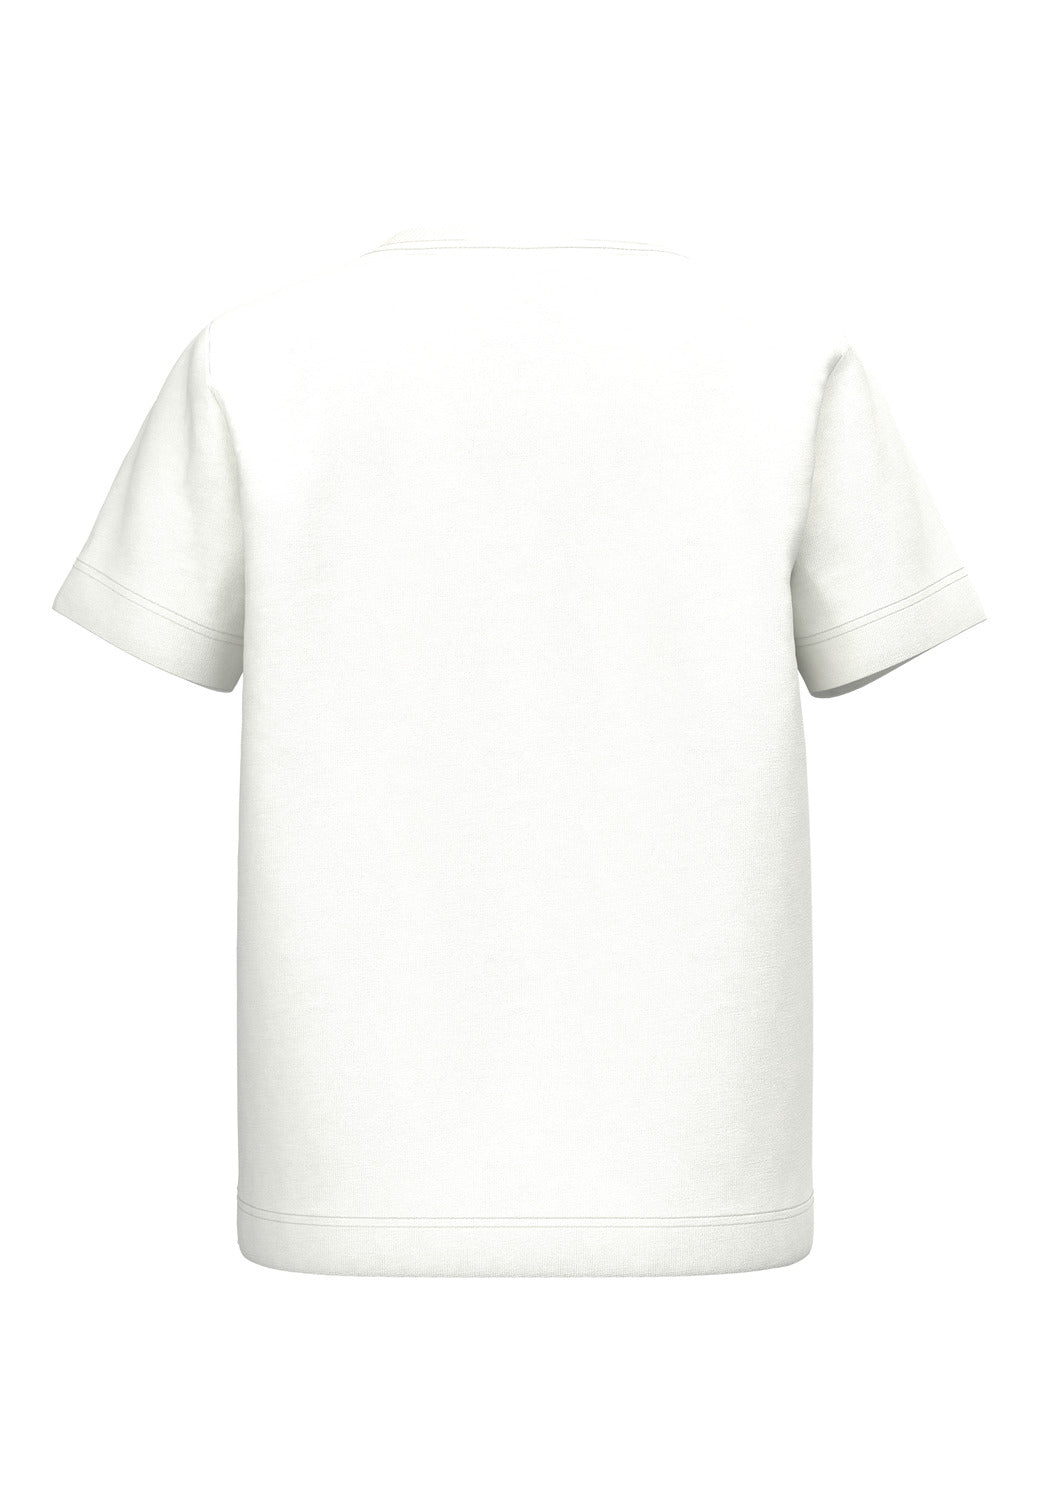 NMMVICTOR T-Shirts & Tops - Bright White